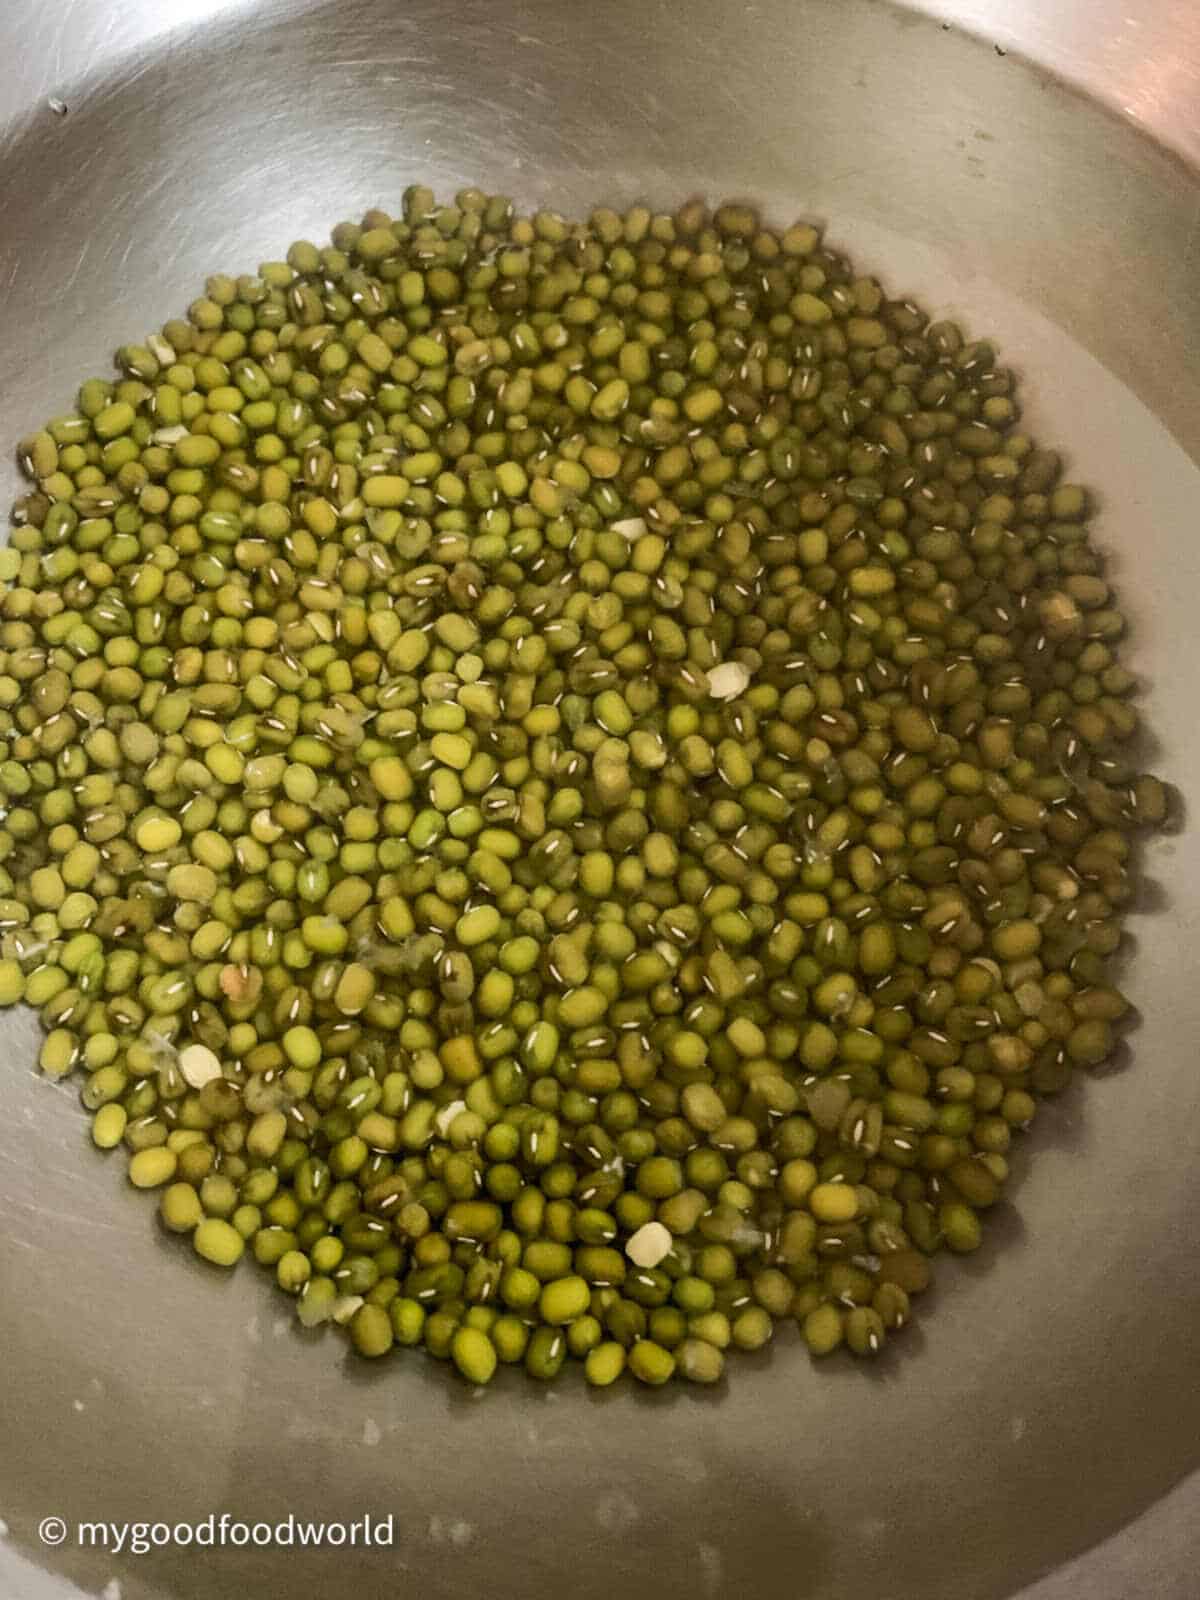 Sabut (whole) moong beans soaking in water in a stainless steel bowl.